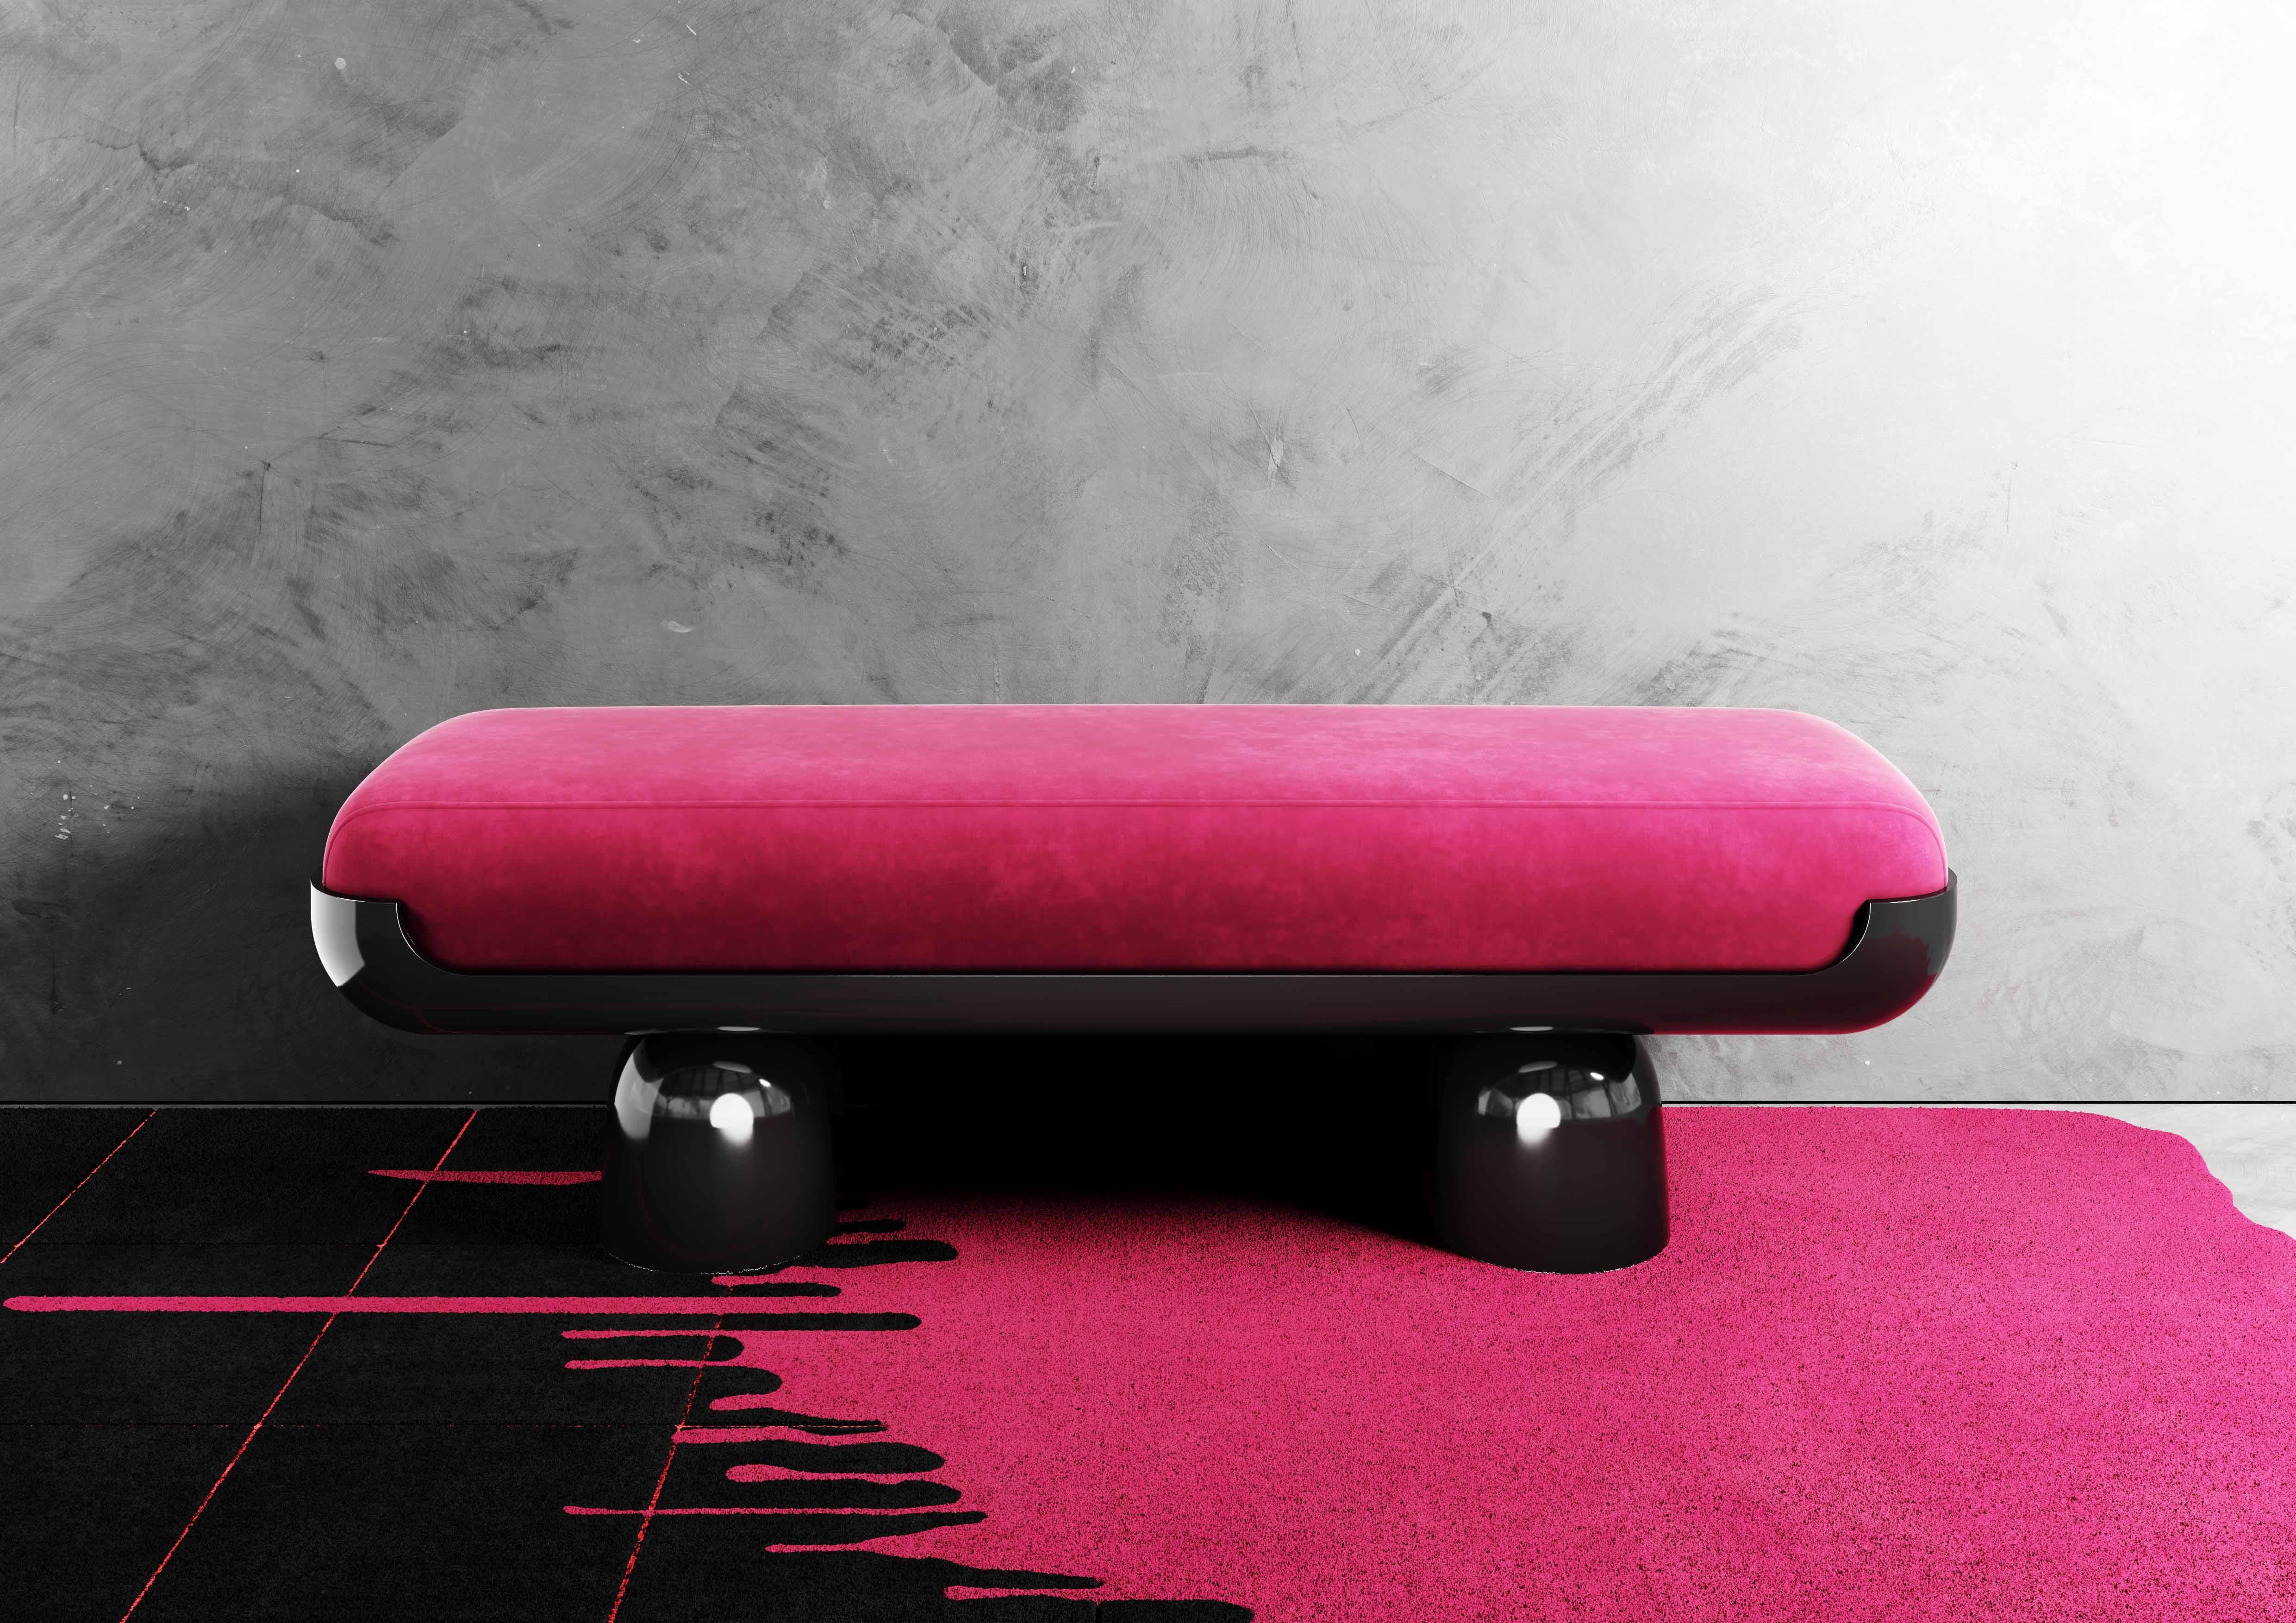 21st Century Contemporary Minimal Pink Velvet Bench, base Matte Black
Fifih Bench Pink is a modern bench upholstered in a hot pink fabric that will suit any interior style, from the living room to the bedroom, entryway, or office space. A